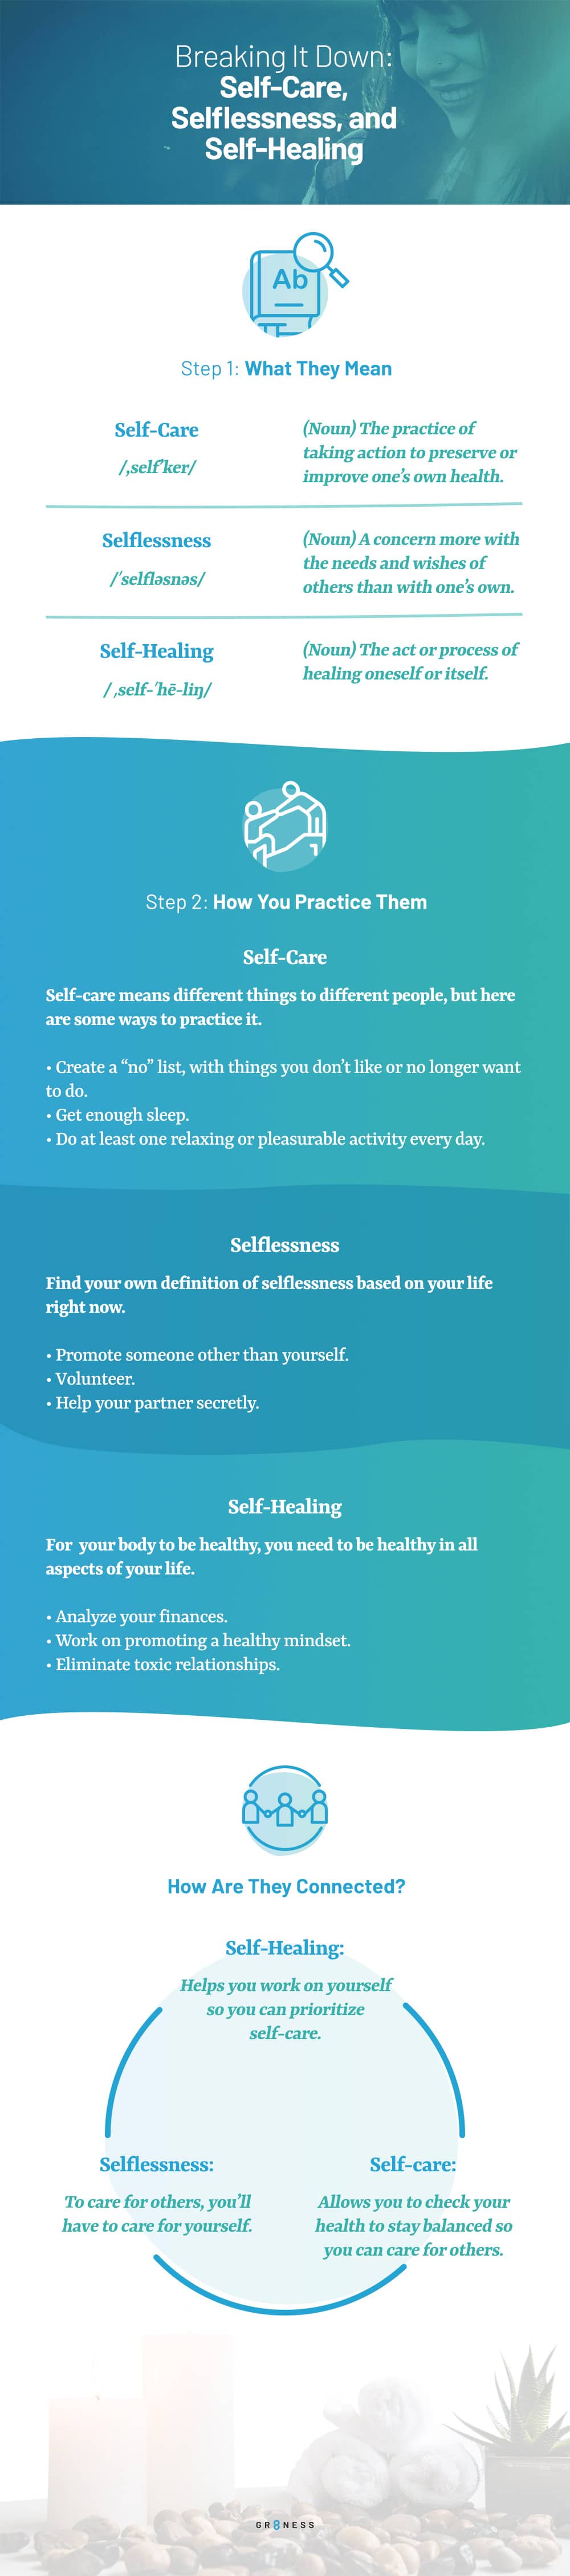 An infographic breaking down self-care, selflessness and self-healing